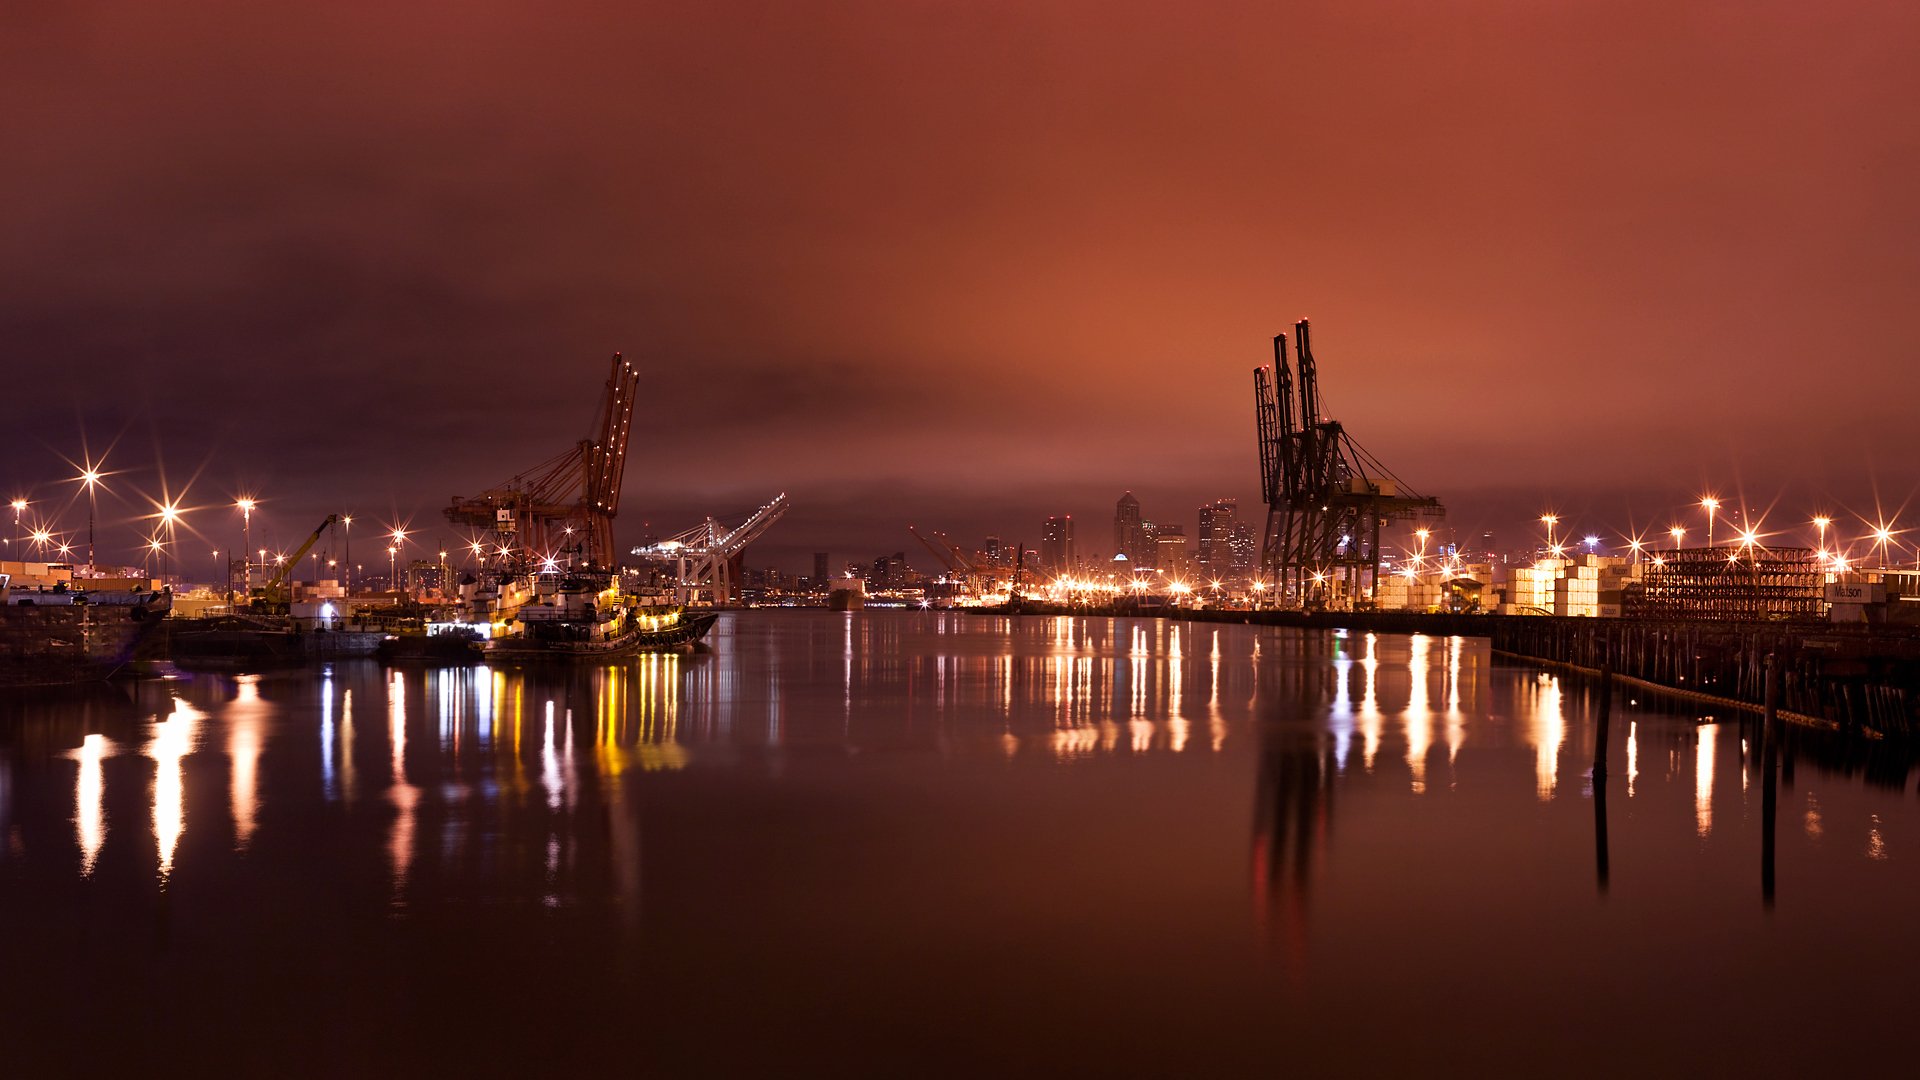 Amazing Good Night Hd Wallpaper - Container Terminal - HD Wallpaper 